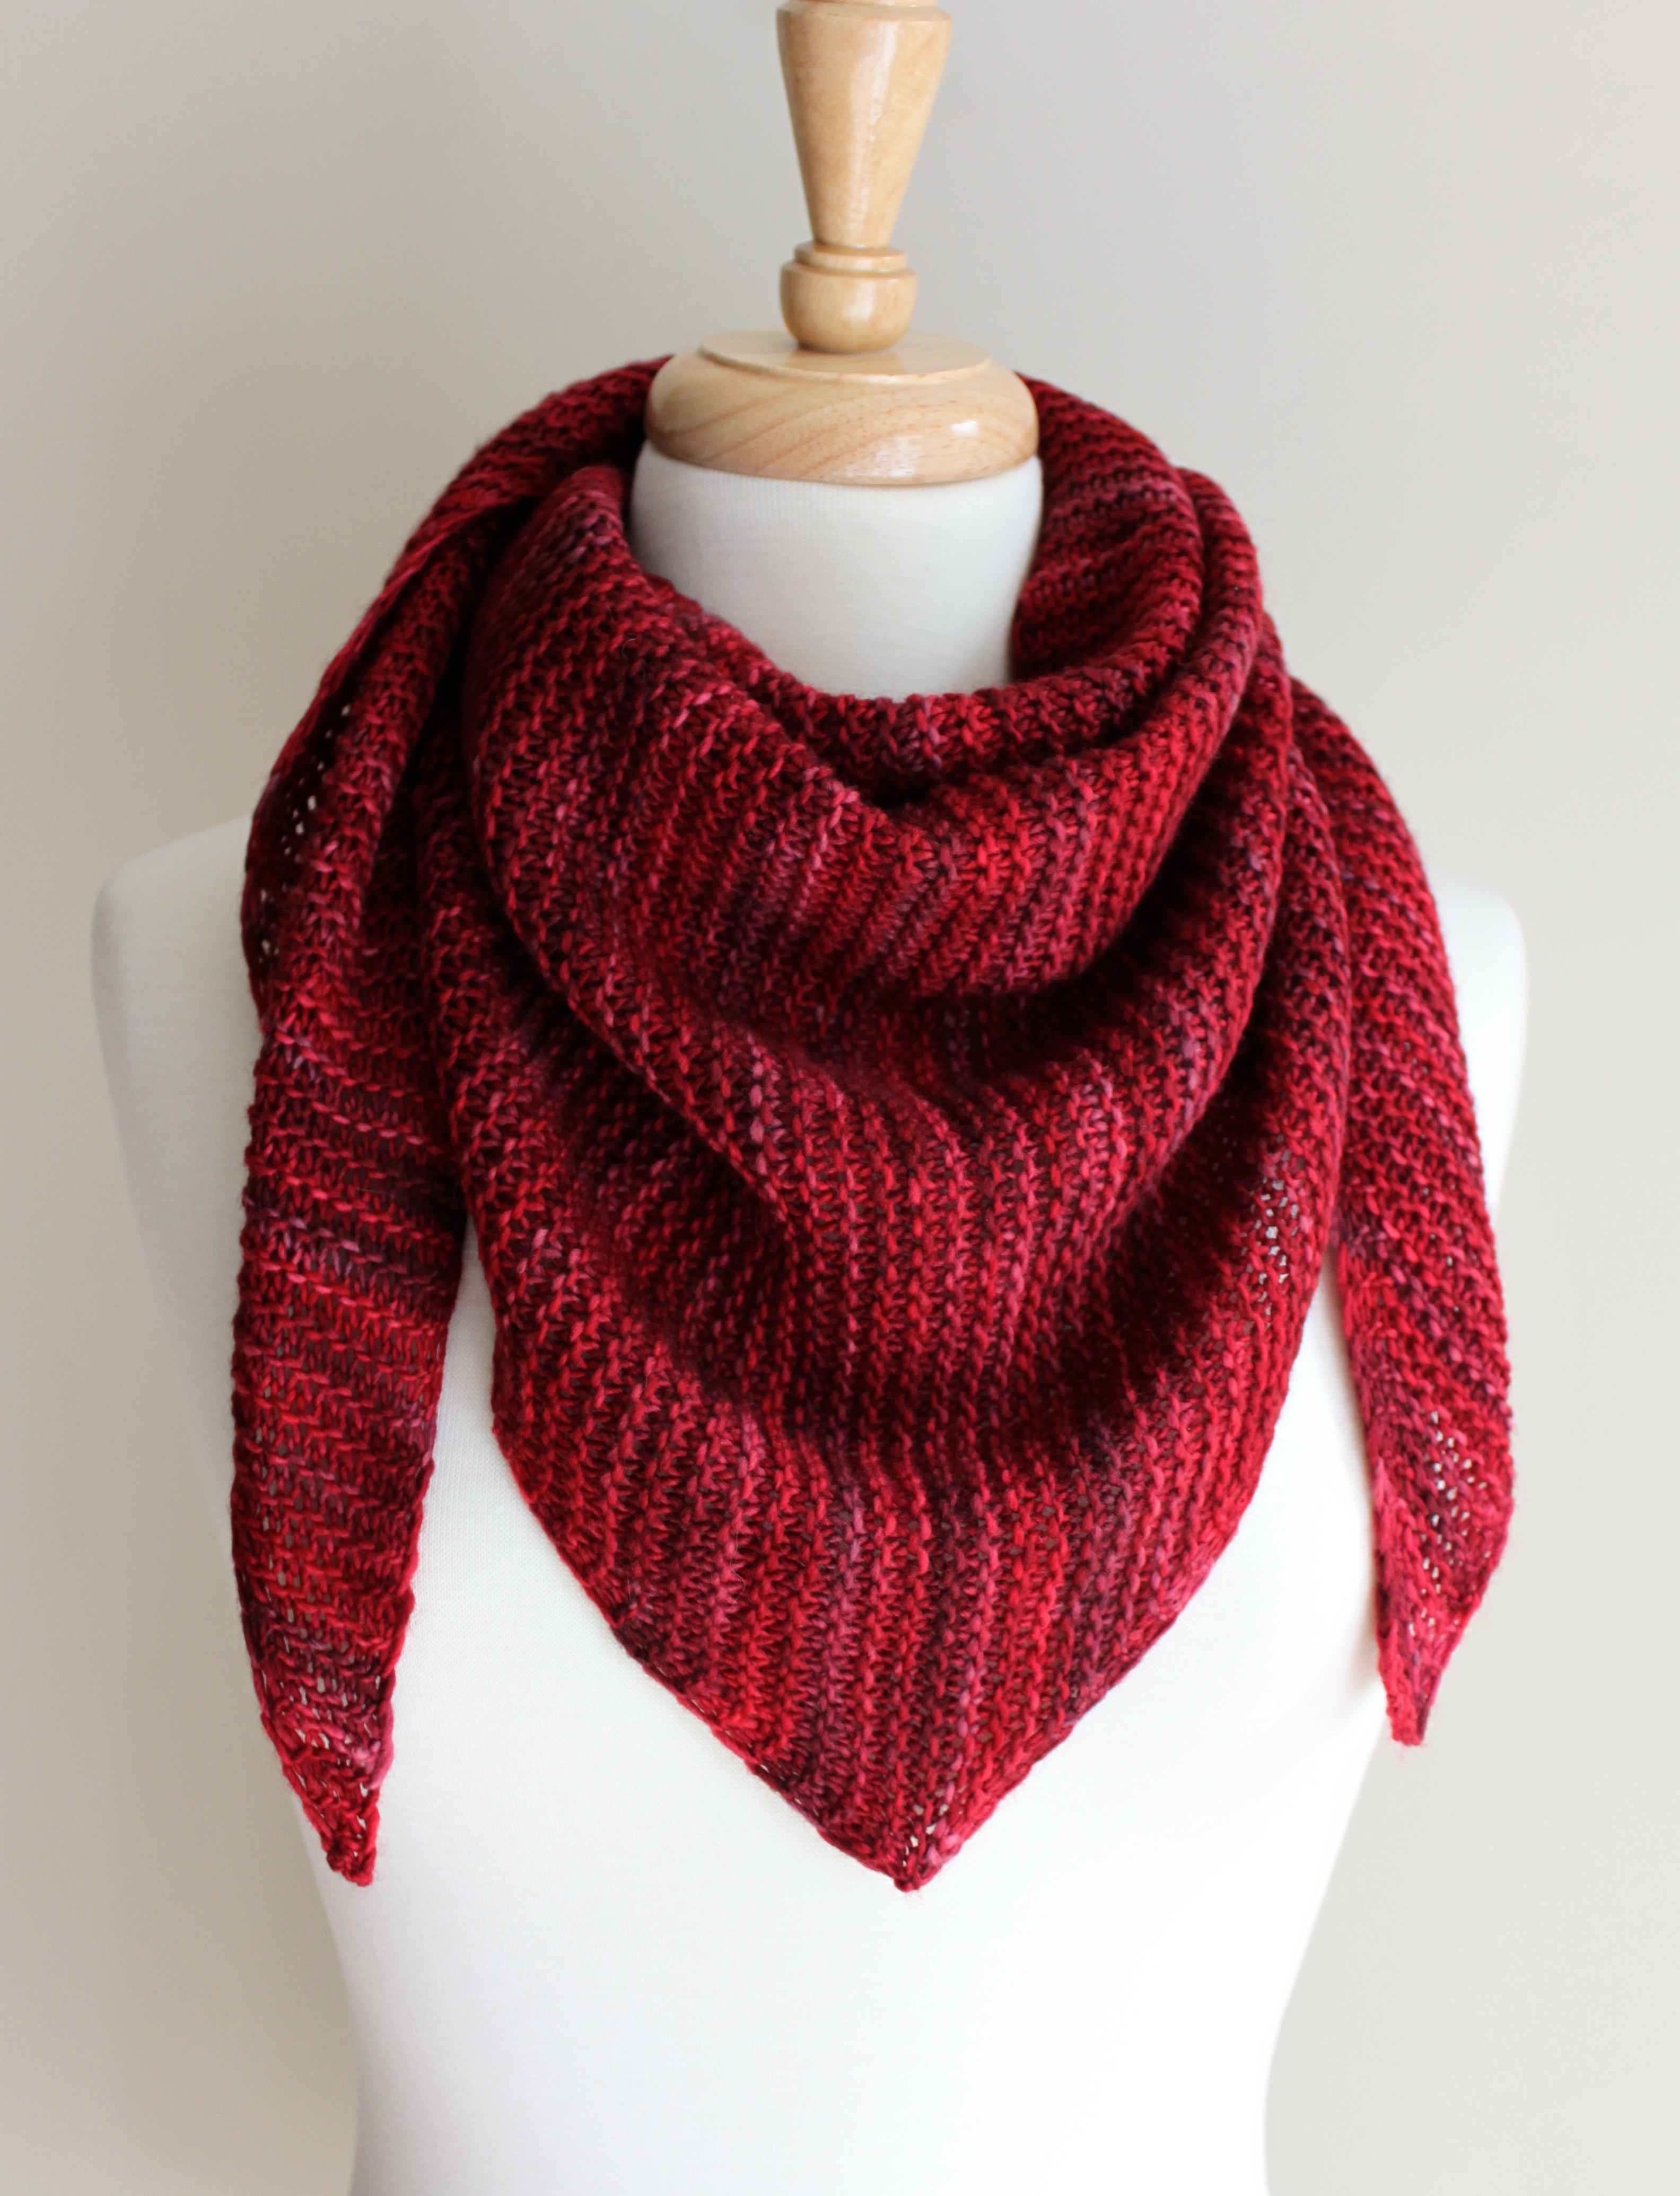 Free Easy Knitting Scarf Patterns For Beginners Easy Knitting Patterns For Beginners Scar